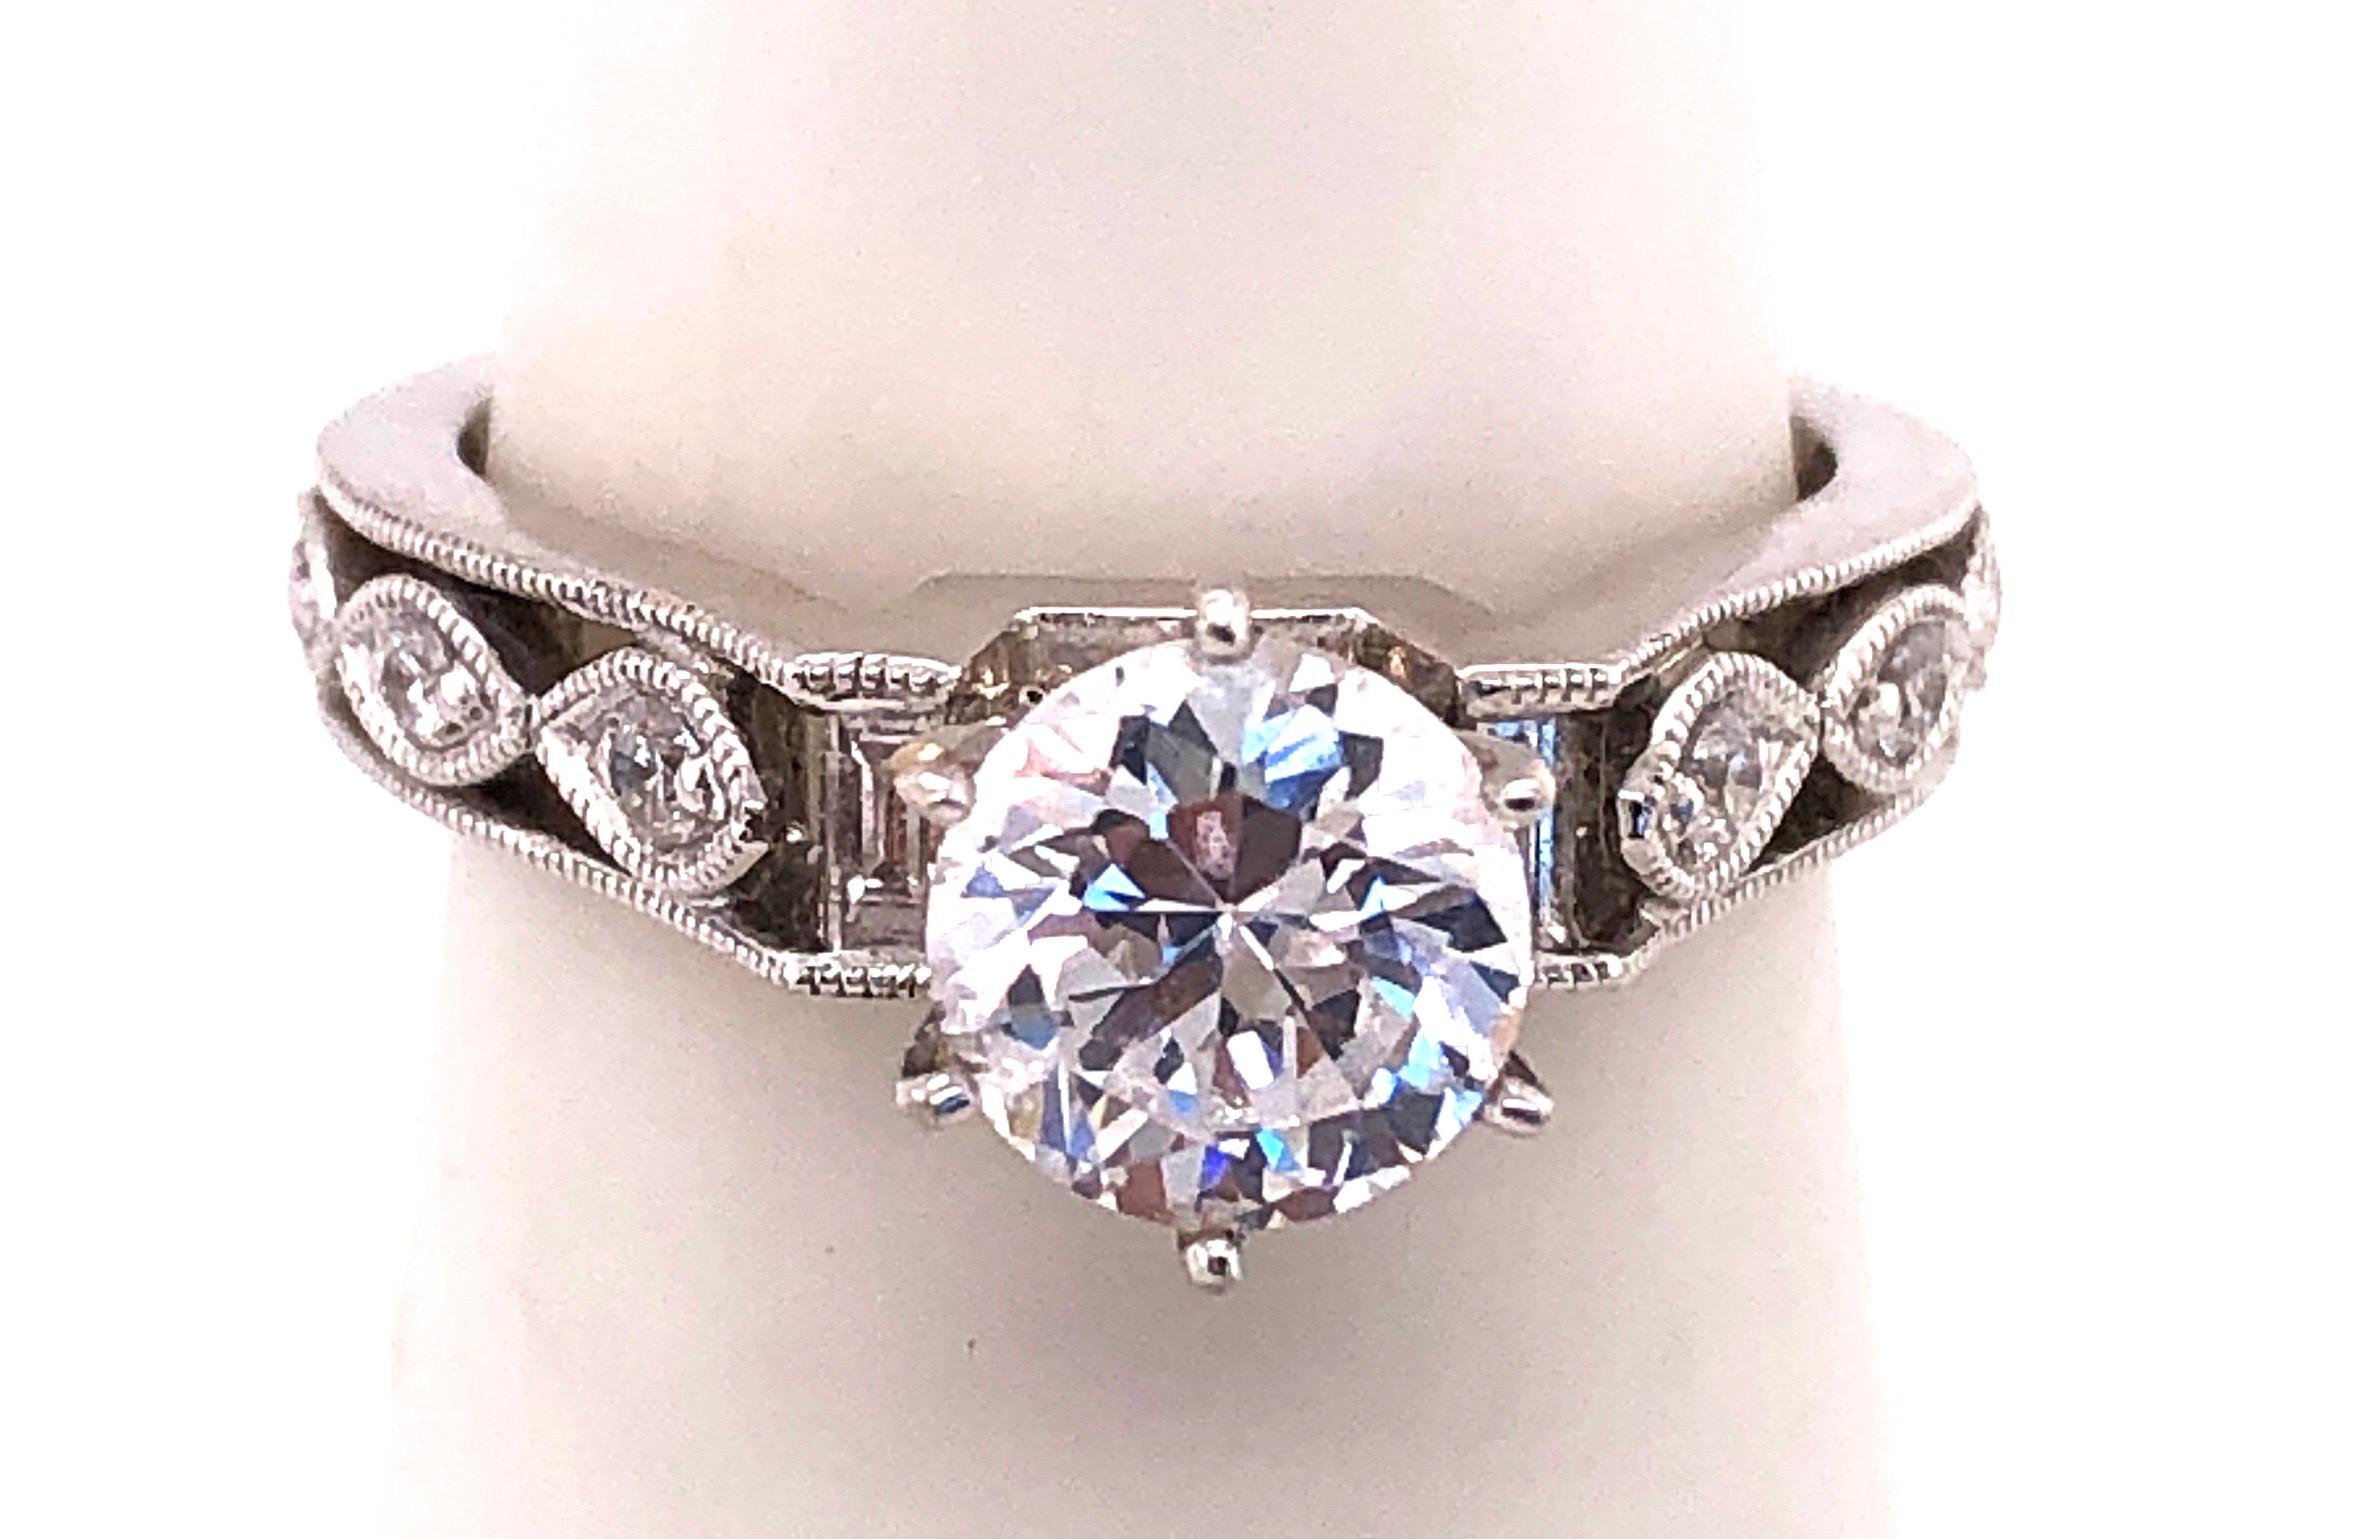 18 Kt White Gold Engagement Bridal Ring With Zircon Center Stone. 0.25 Total Diamond Weight.
Size 6.5 
4.28 grams total weight.